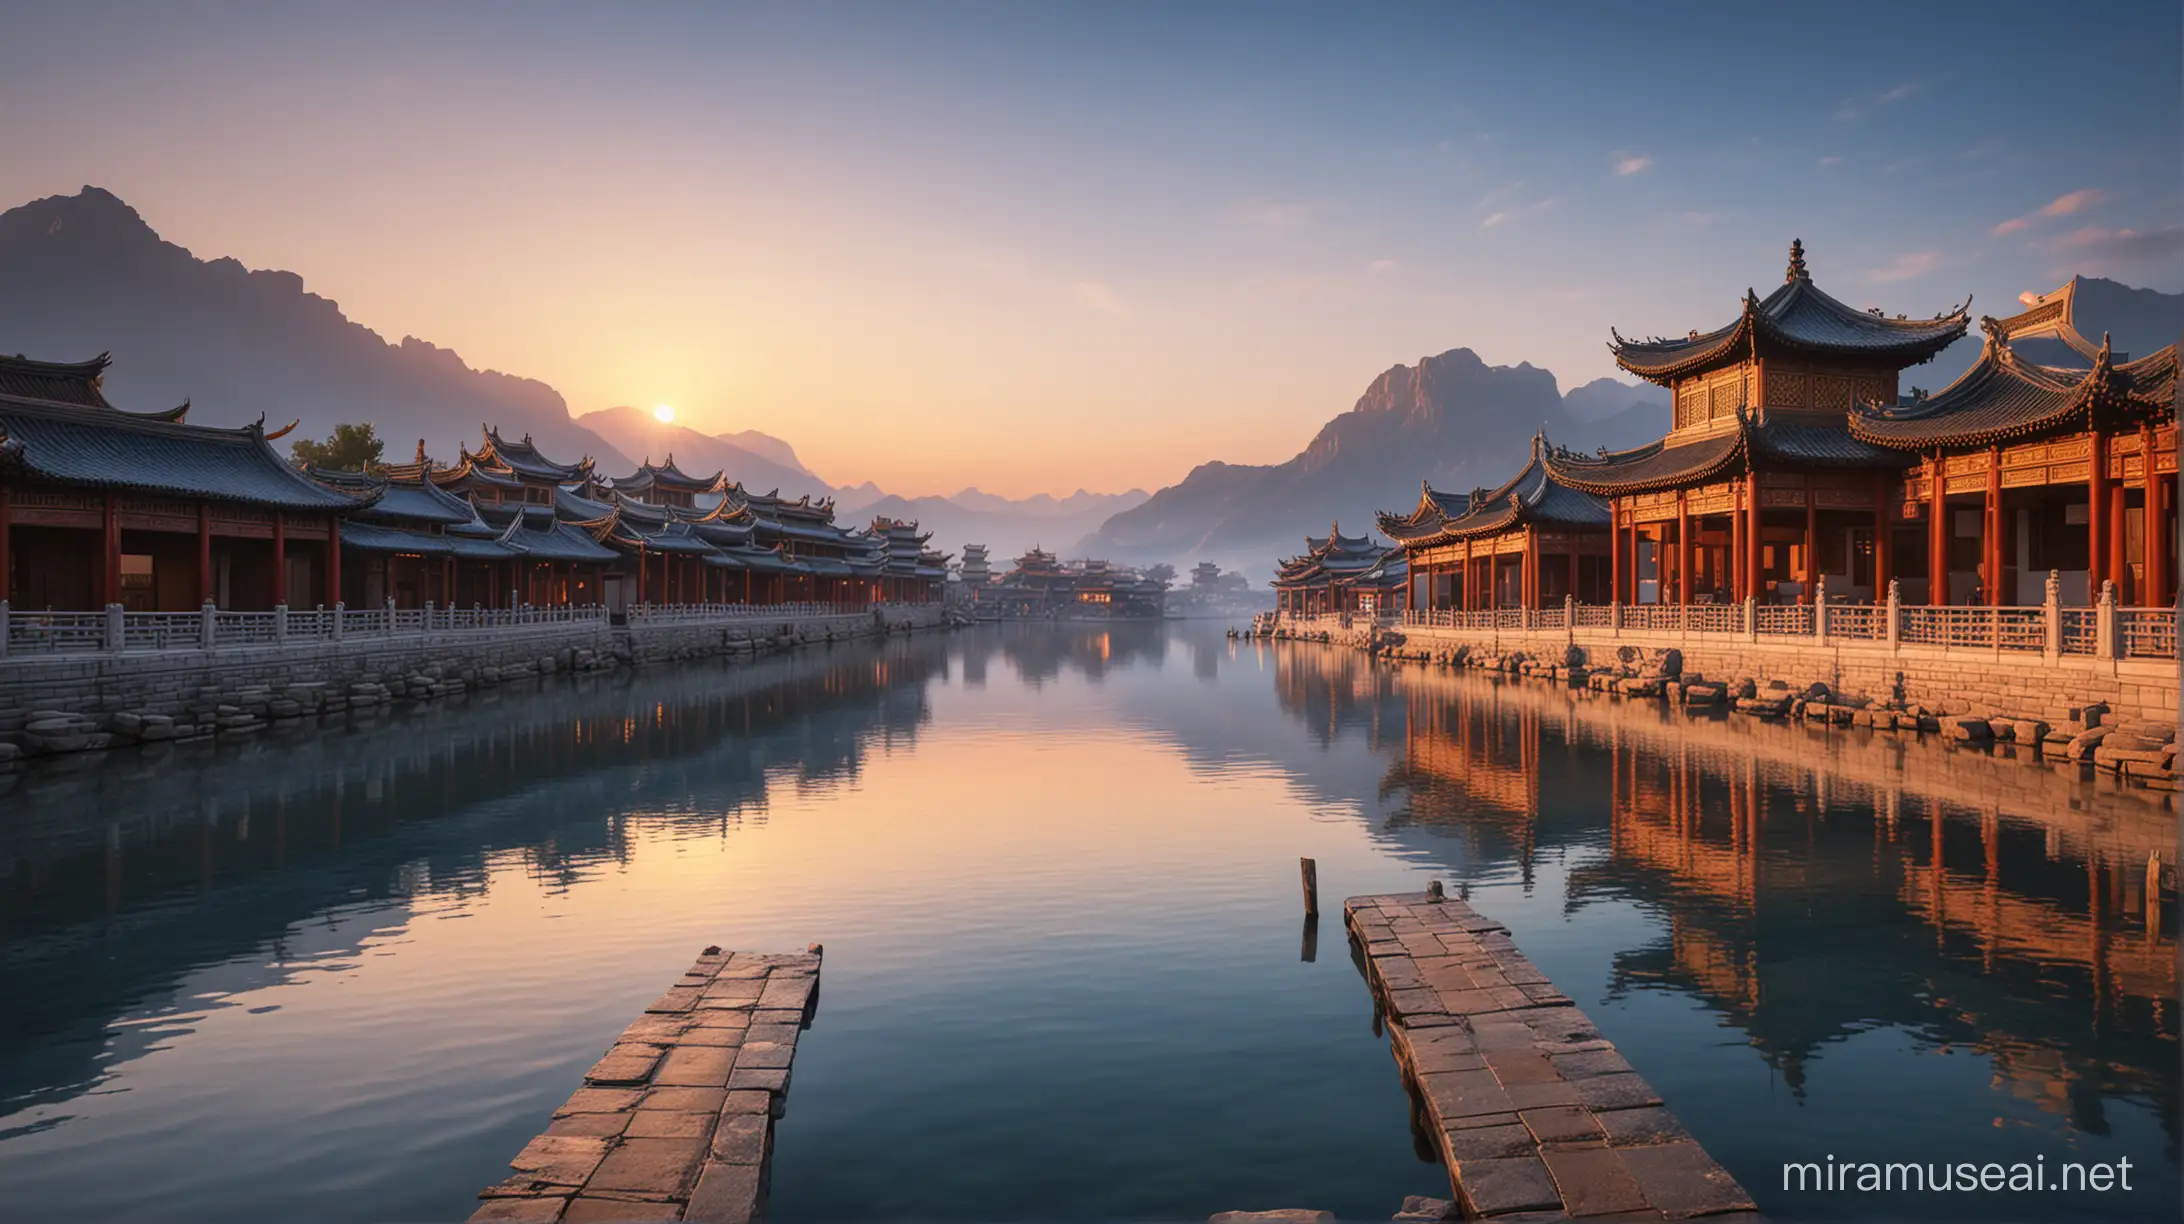 oriental chinese place, beautiful dreamscape, calm, sunset, golden hour, blue sky, hiper realism, photography